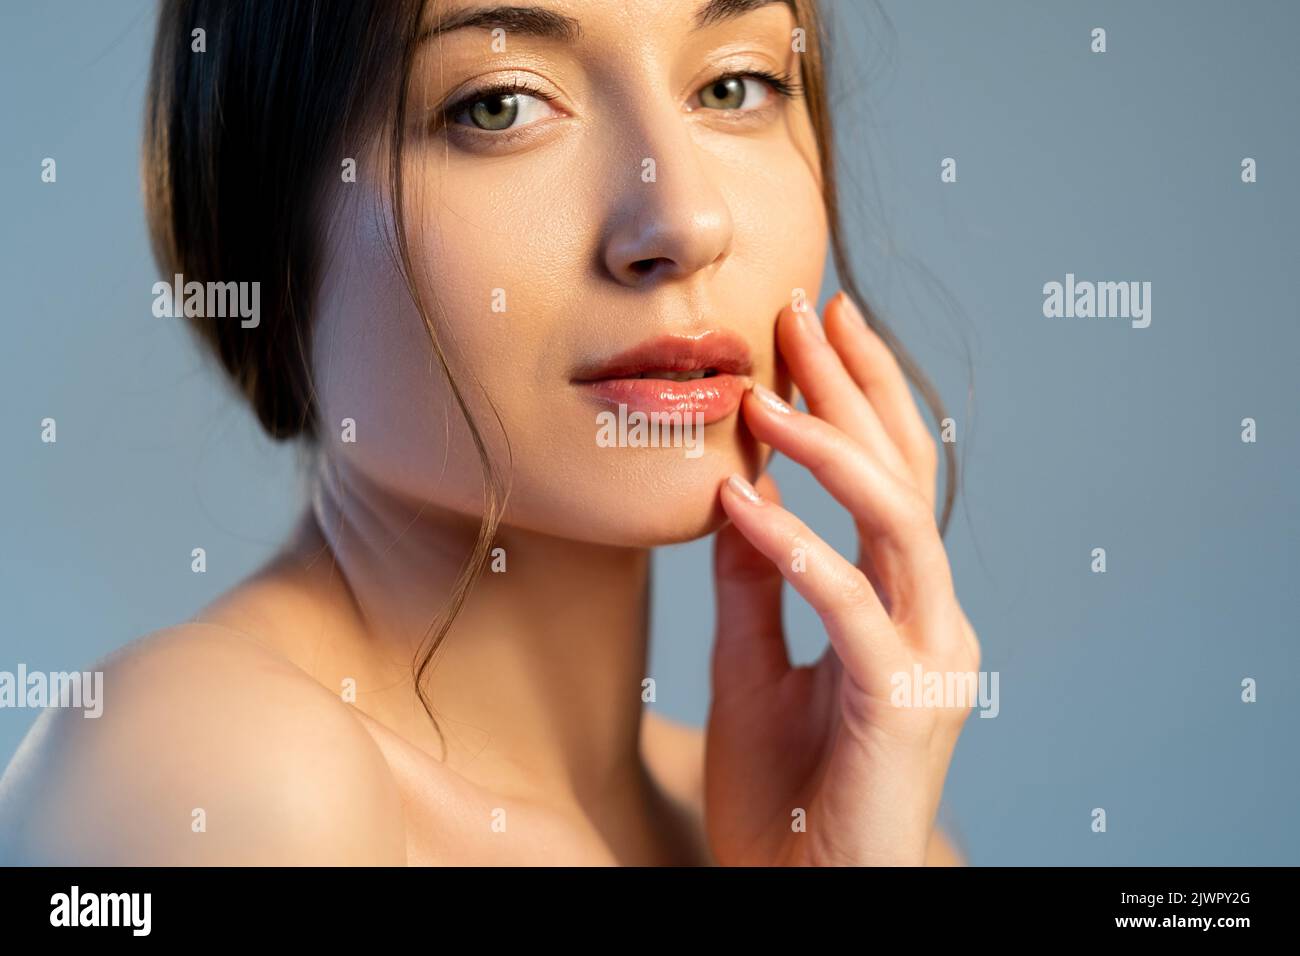 facelift treatment healthy beauty woman clean face Stock Photo